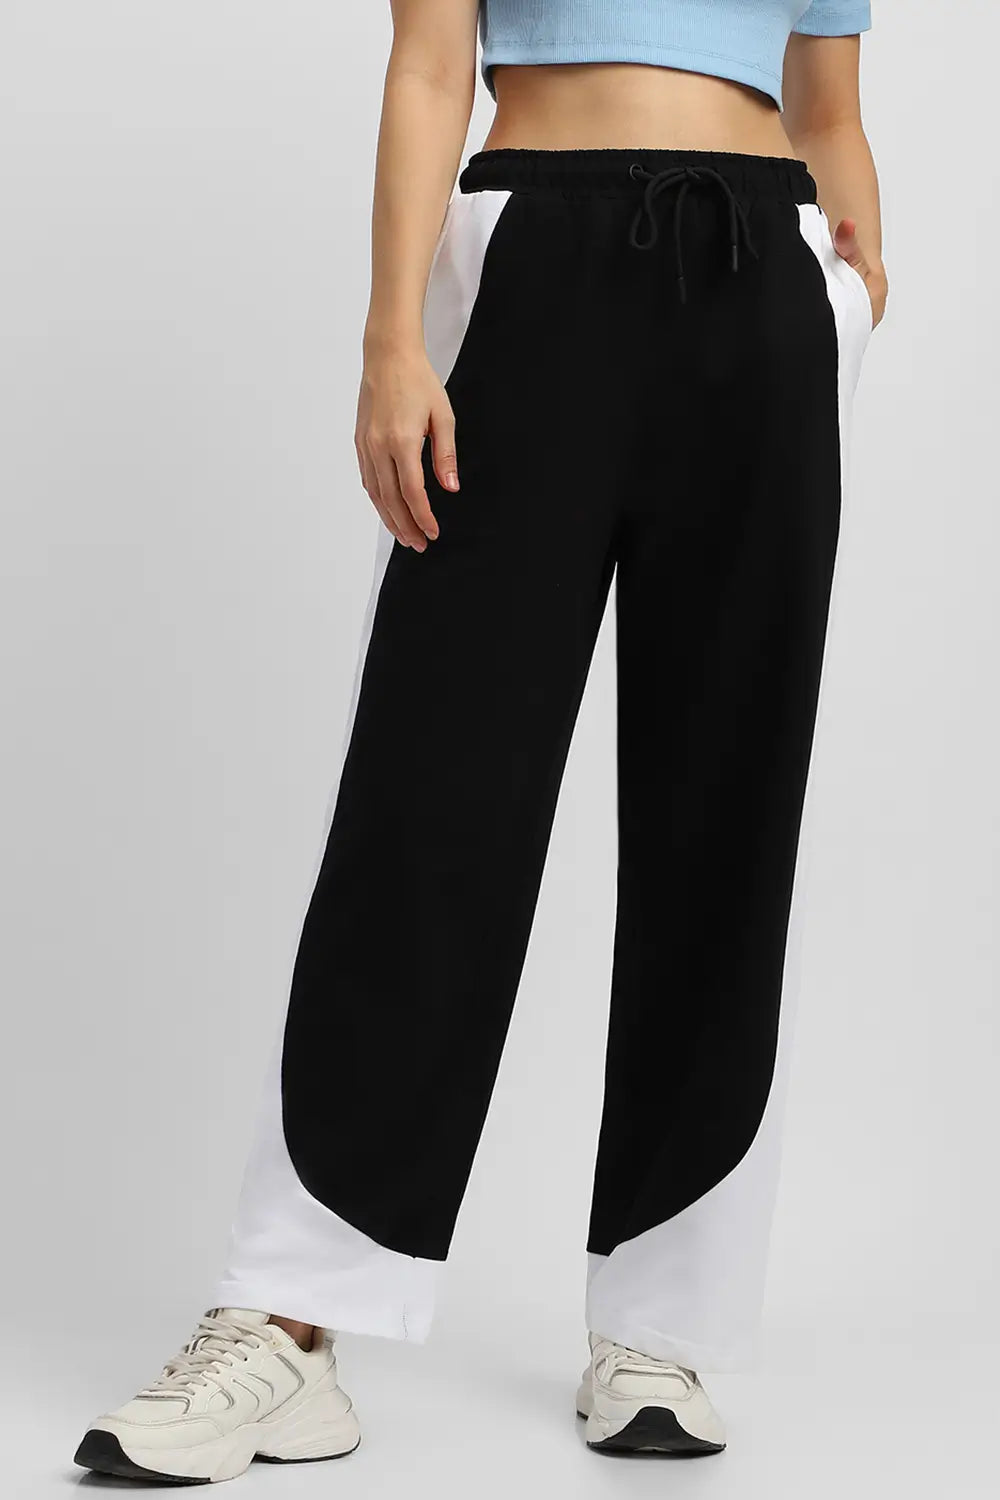 Baggy Fit Colorblocked Joggers Women